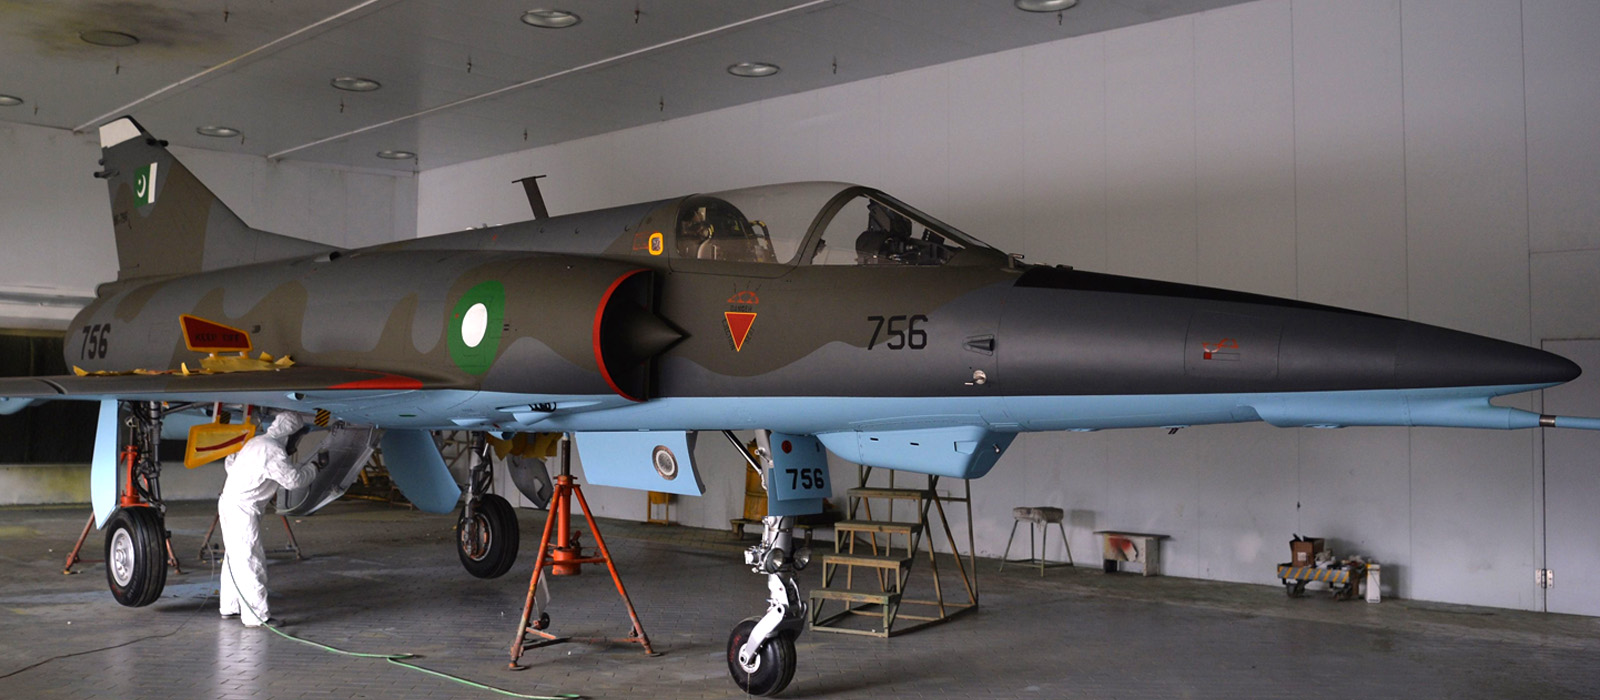 Thrifty at 50: Pakistan keeps ageing Mirages flying